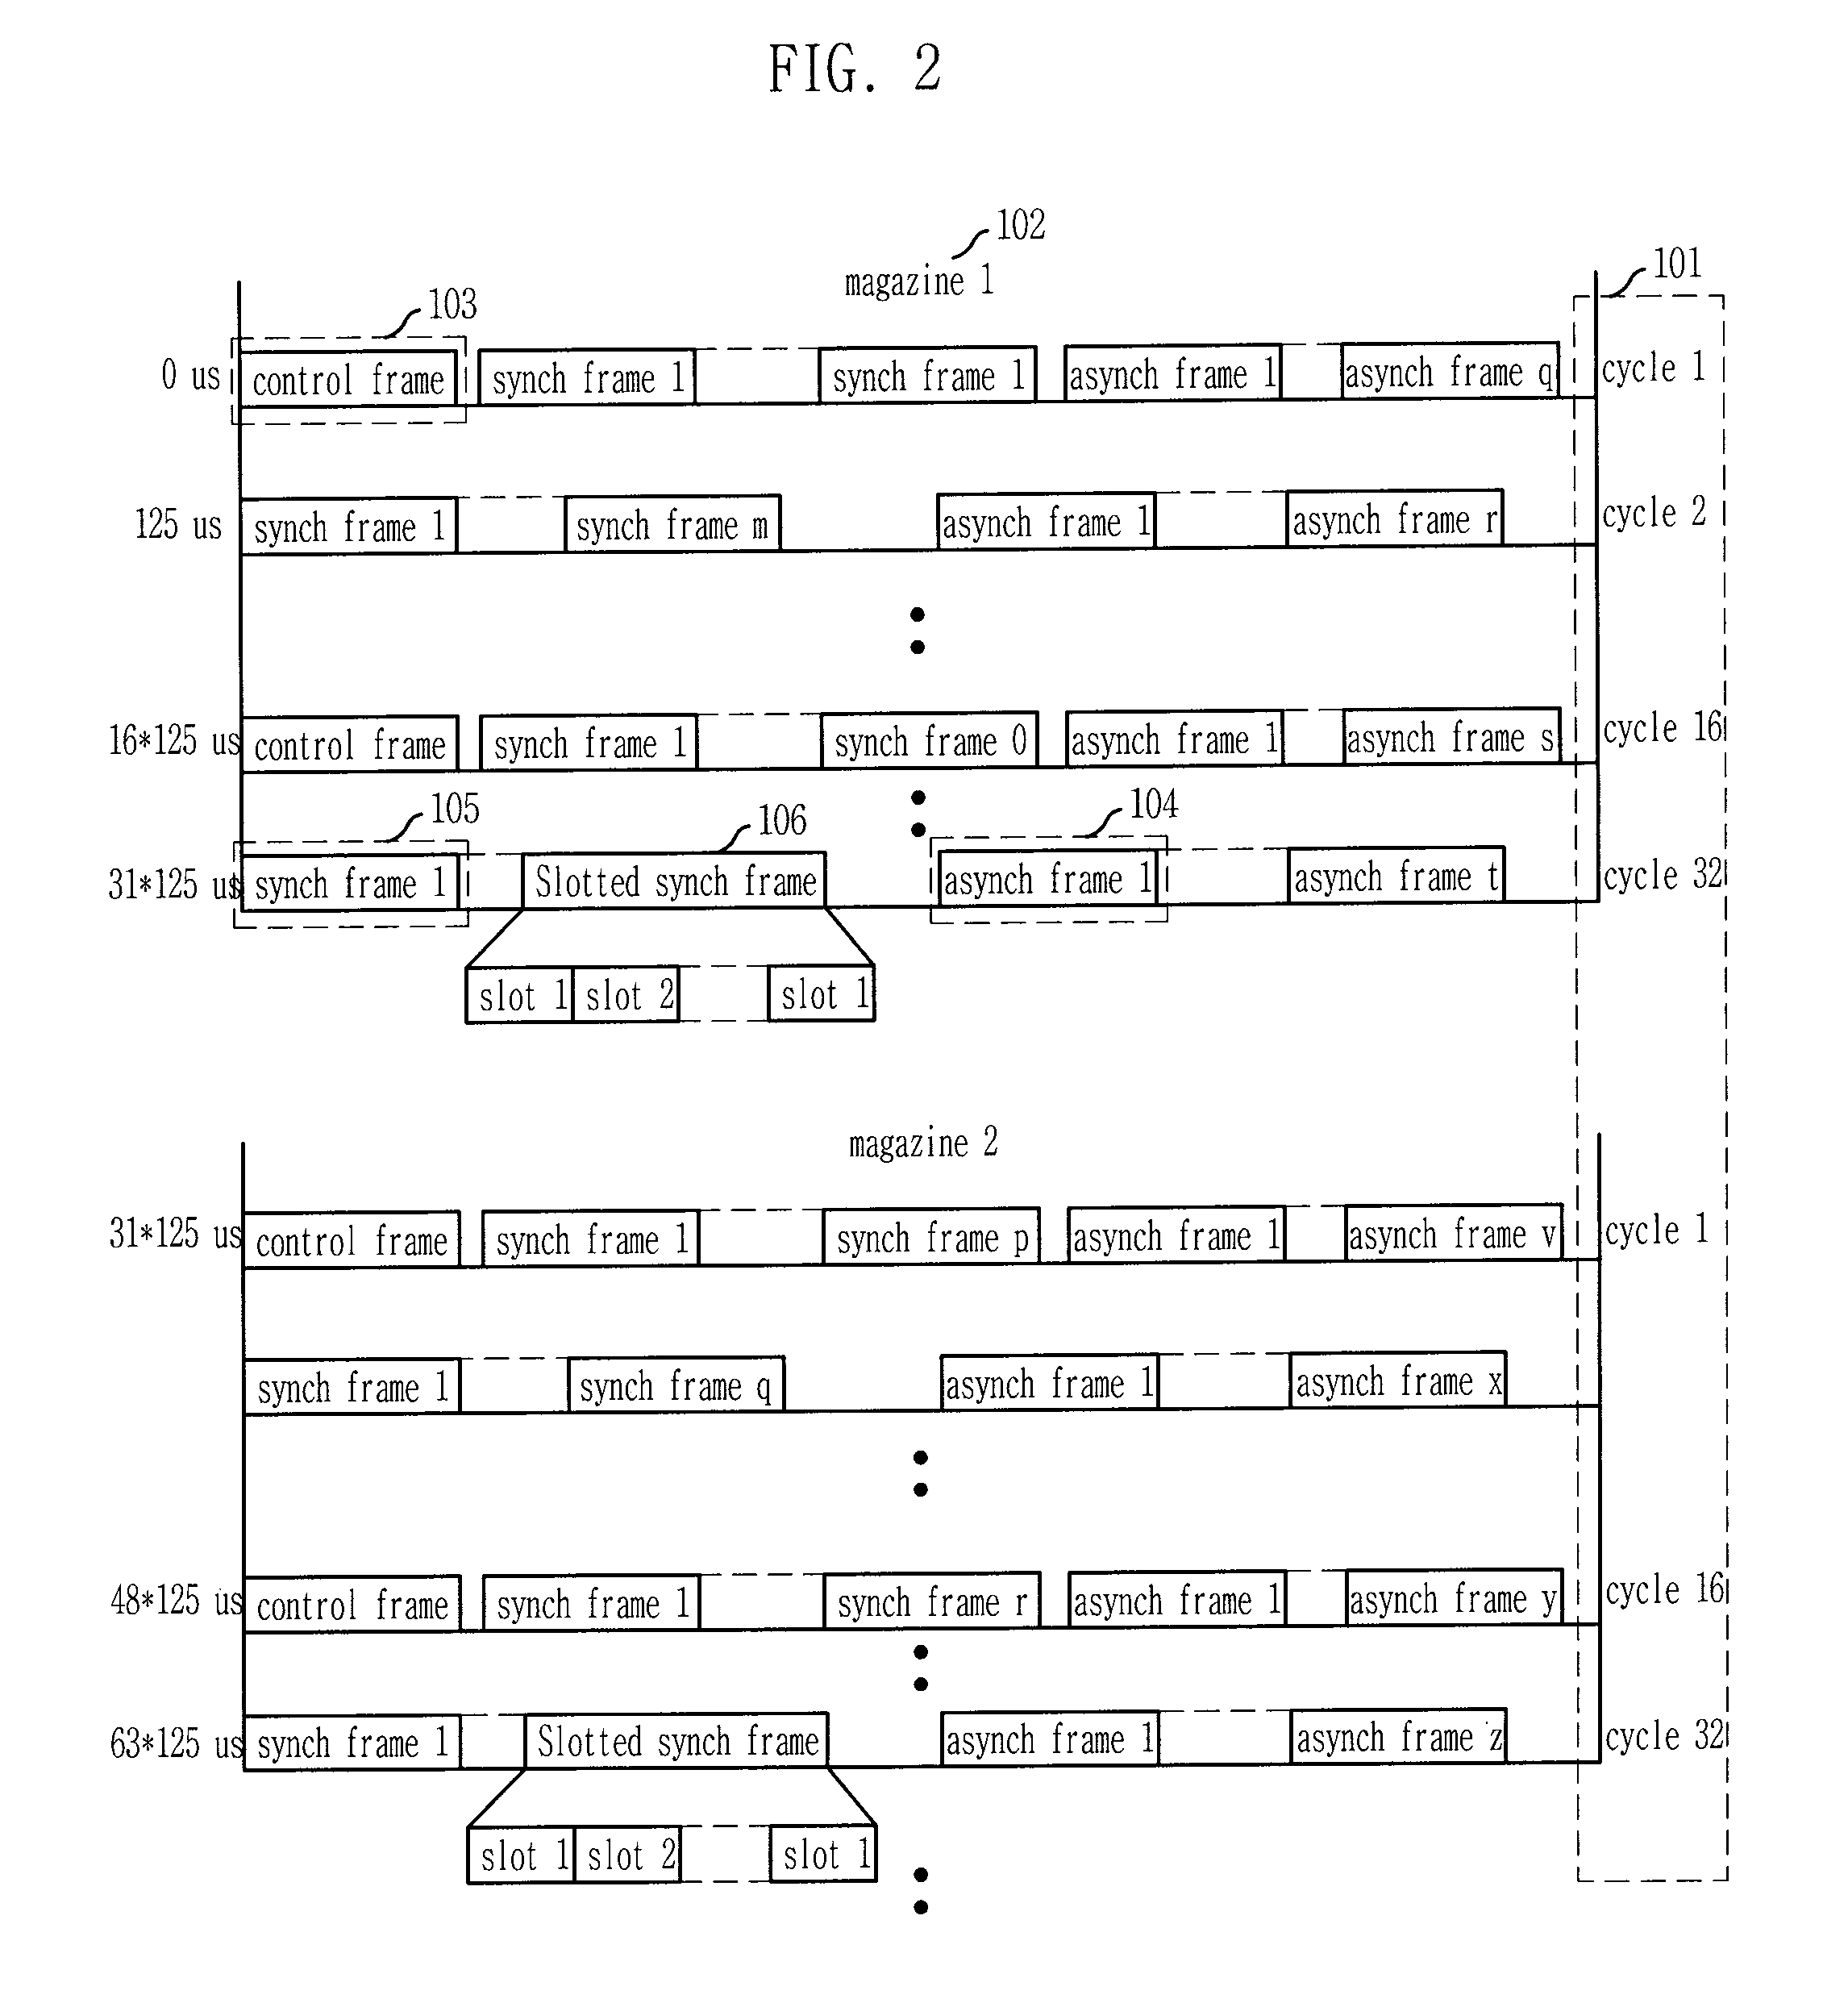 Method and Apparatus for Constituting Transport Network Based on Integrated Synch and Asynch Frame